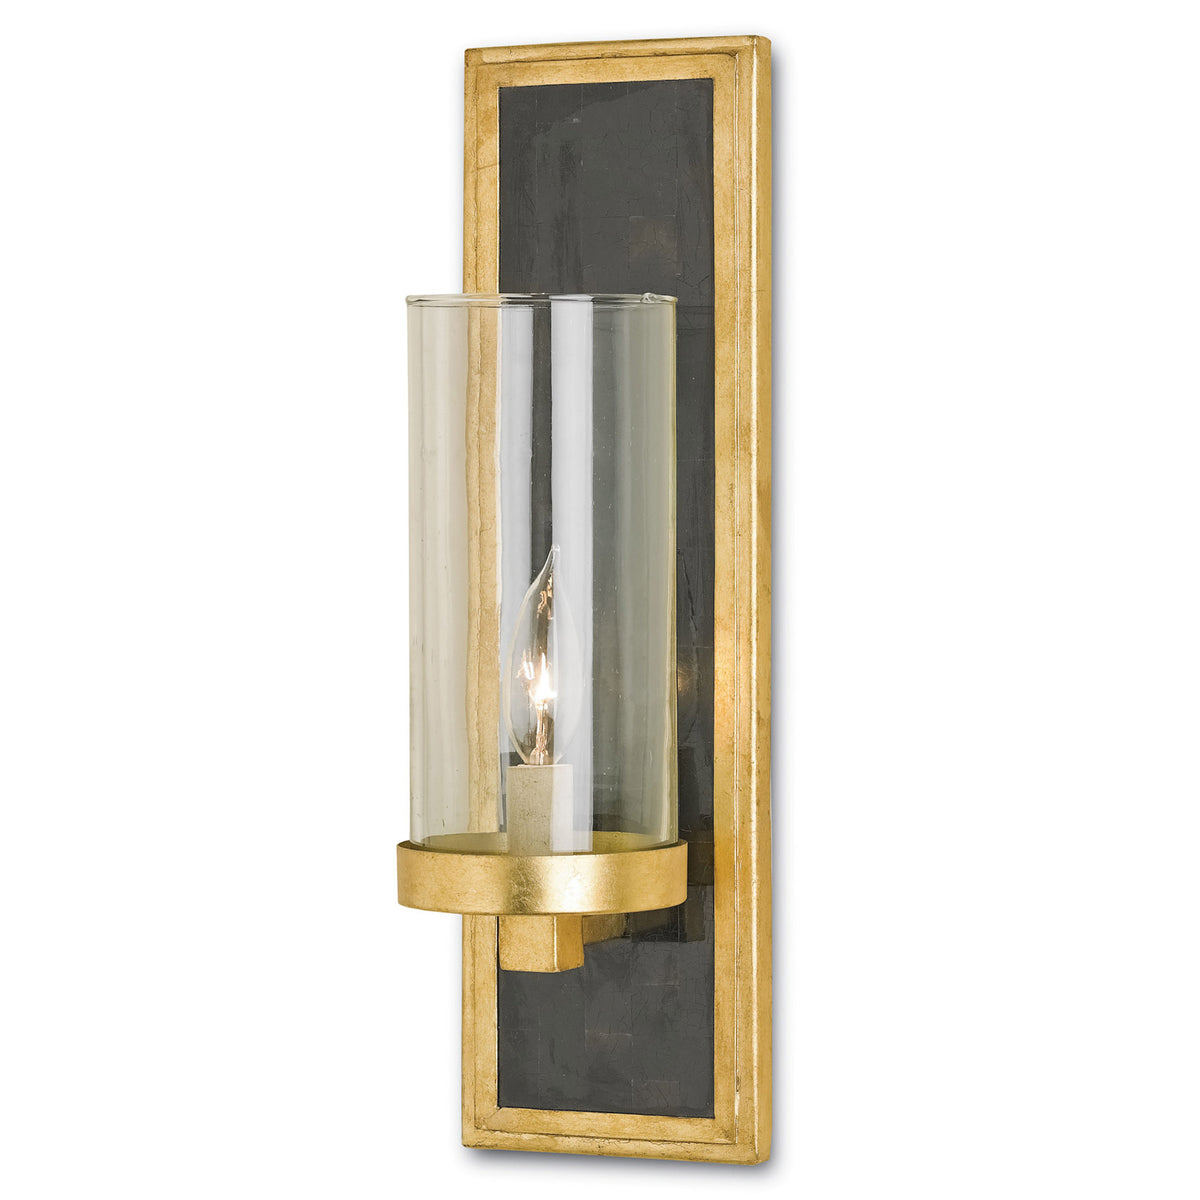 Charade Gold Wall Sconce